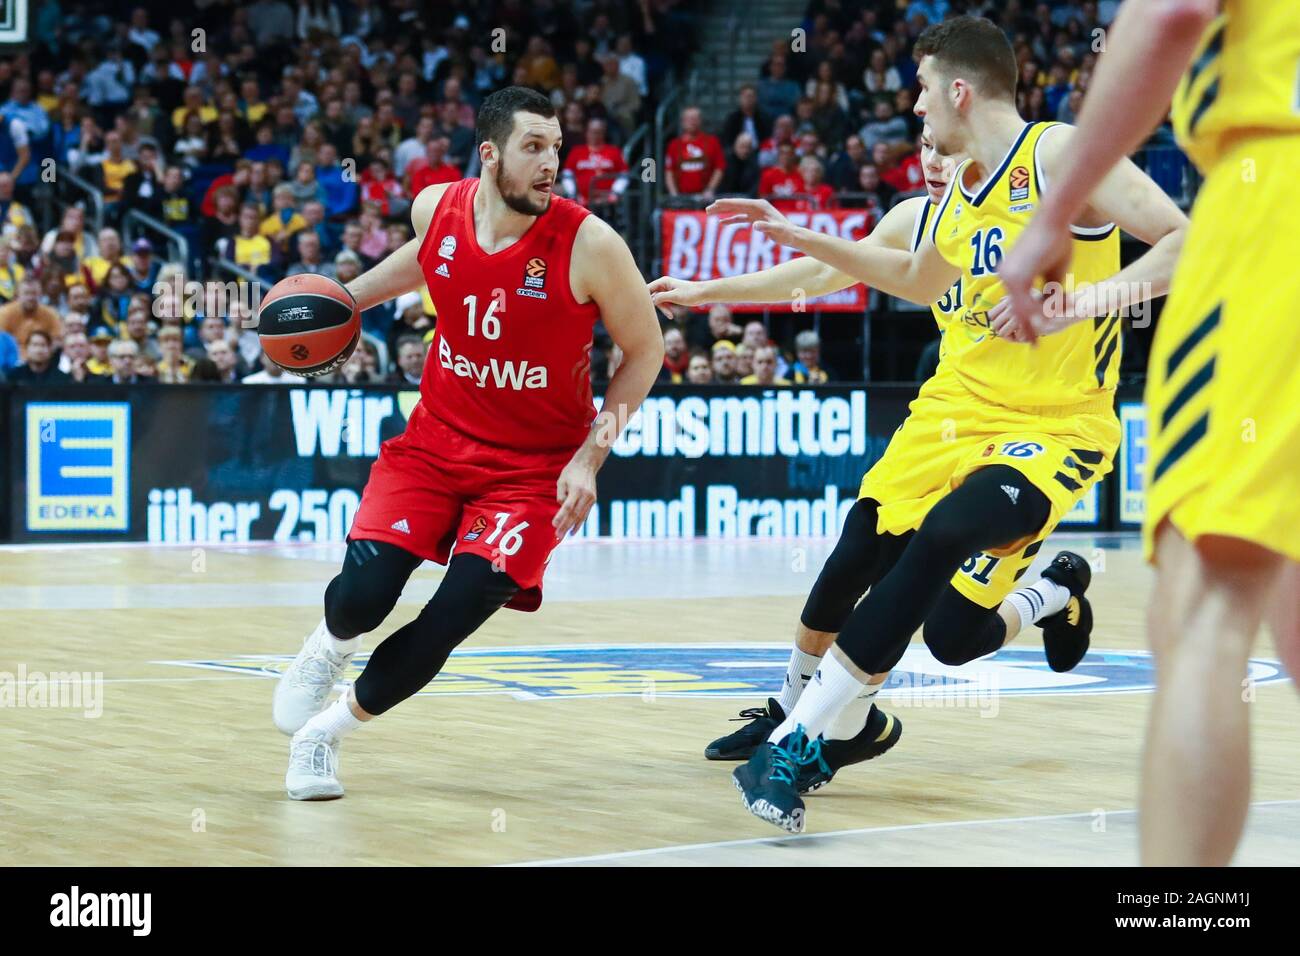 Berlin, Germany, December 18, 2019: Paul Zipser of FC Bayern Munich  Basketball in action during the EuroLeague basketball match Stock Photo -  Alamy